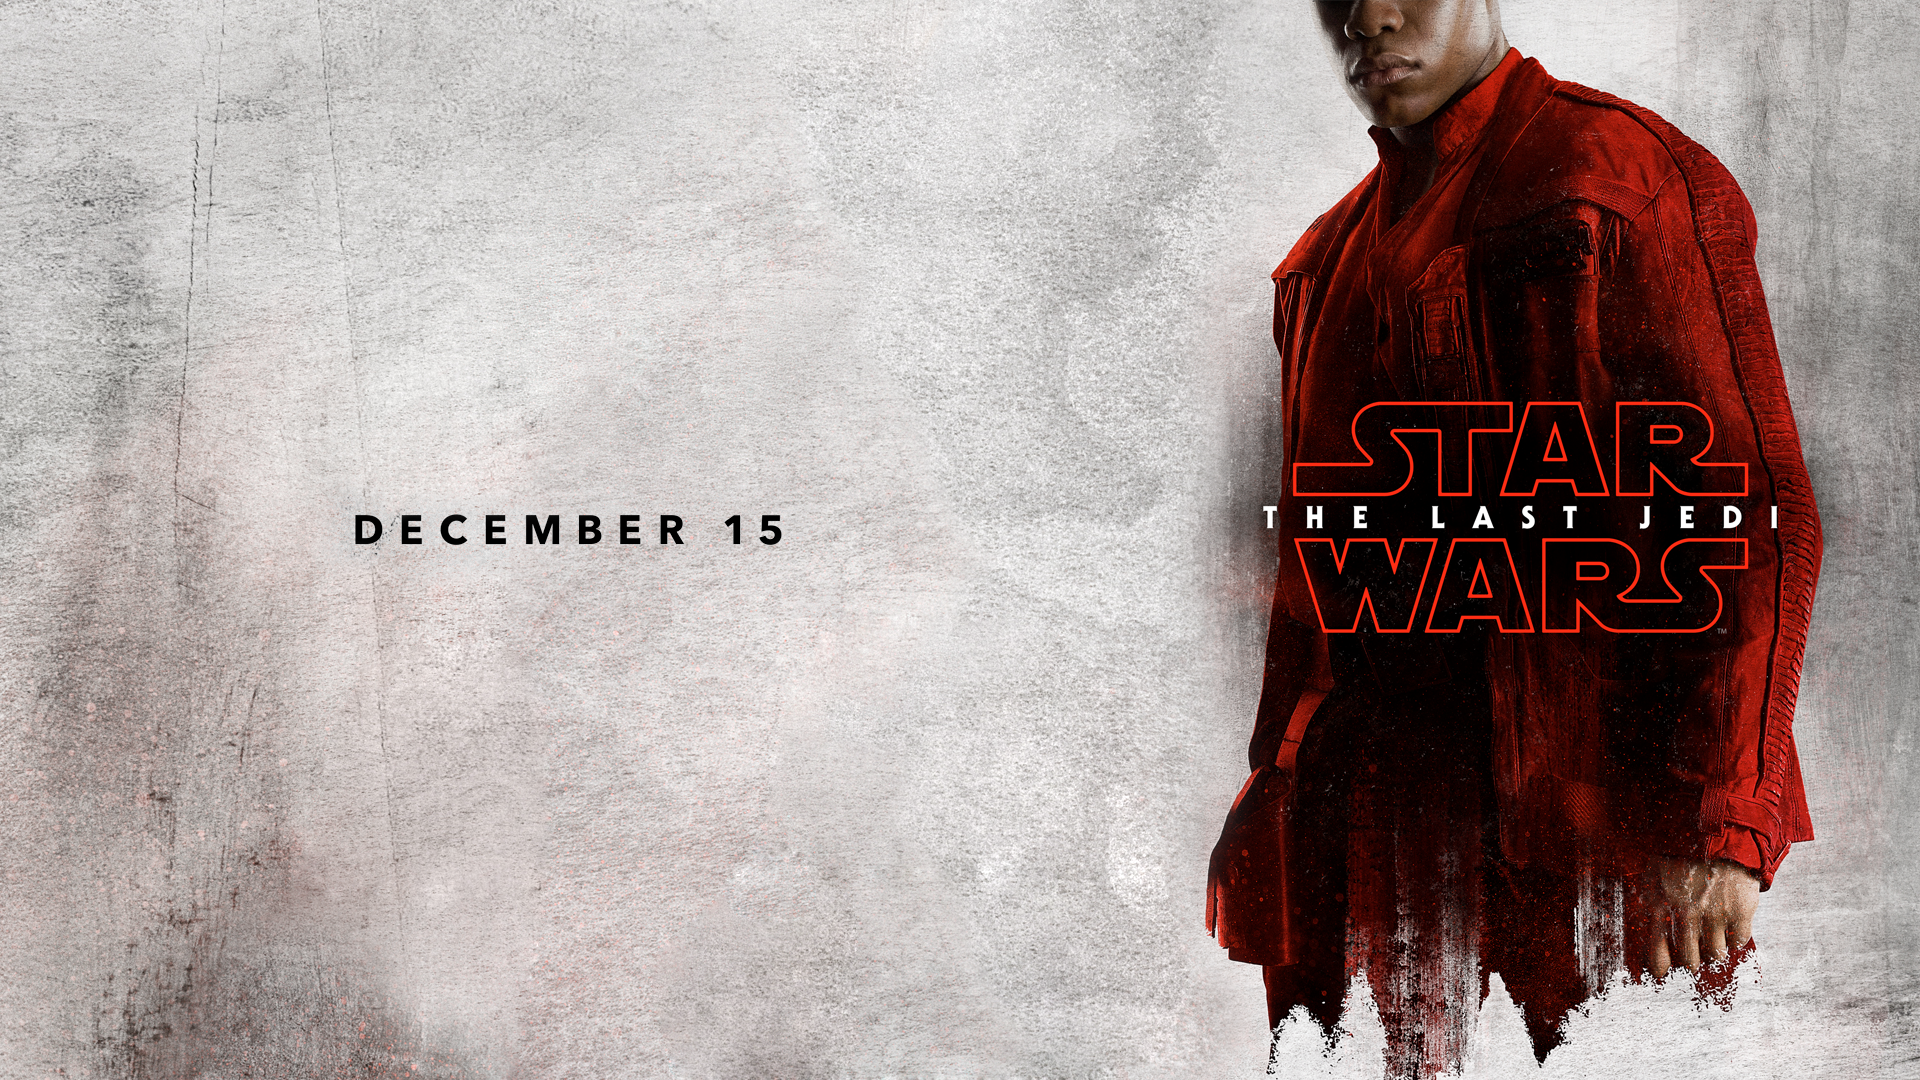 Star Wars The Last Jedi Movie Poster Wallpapers